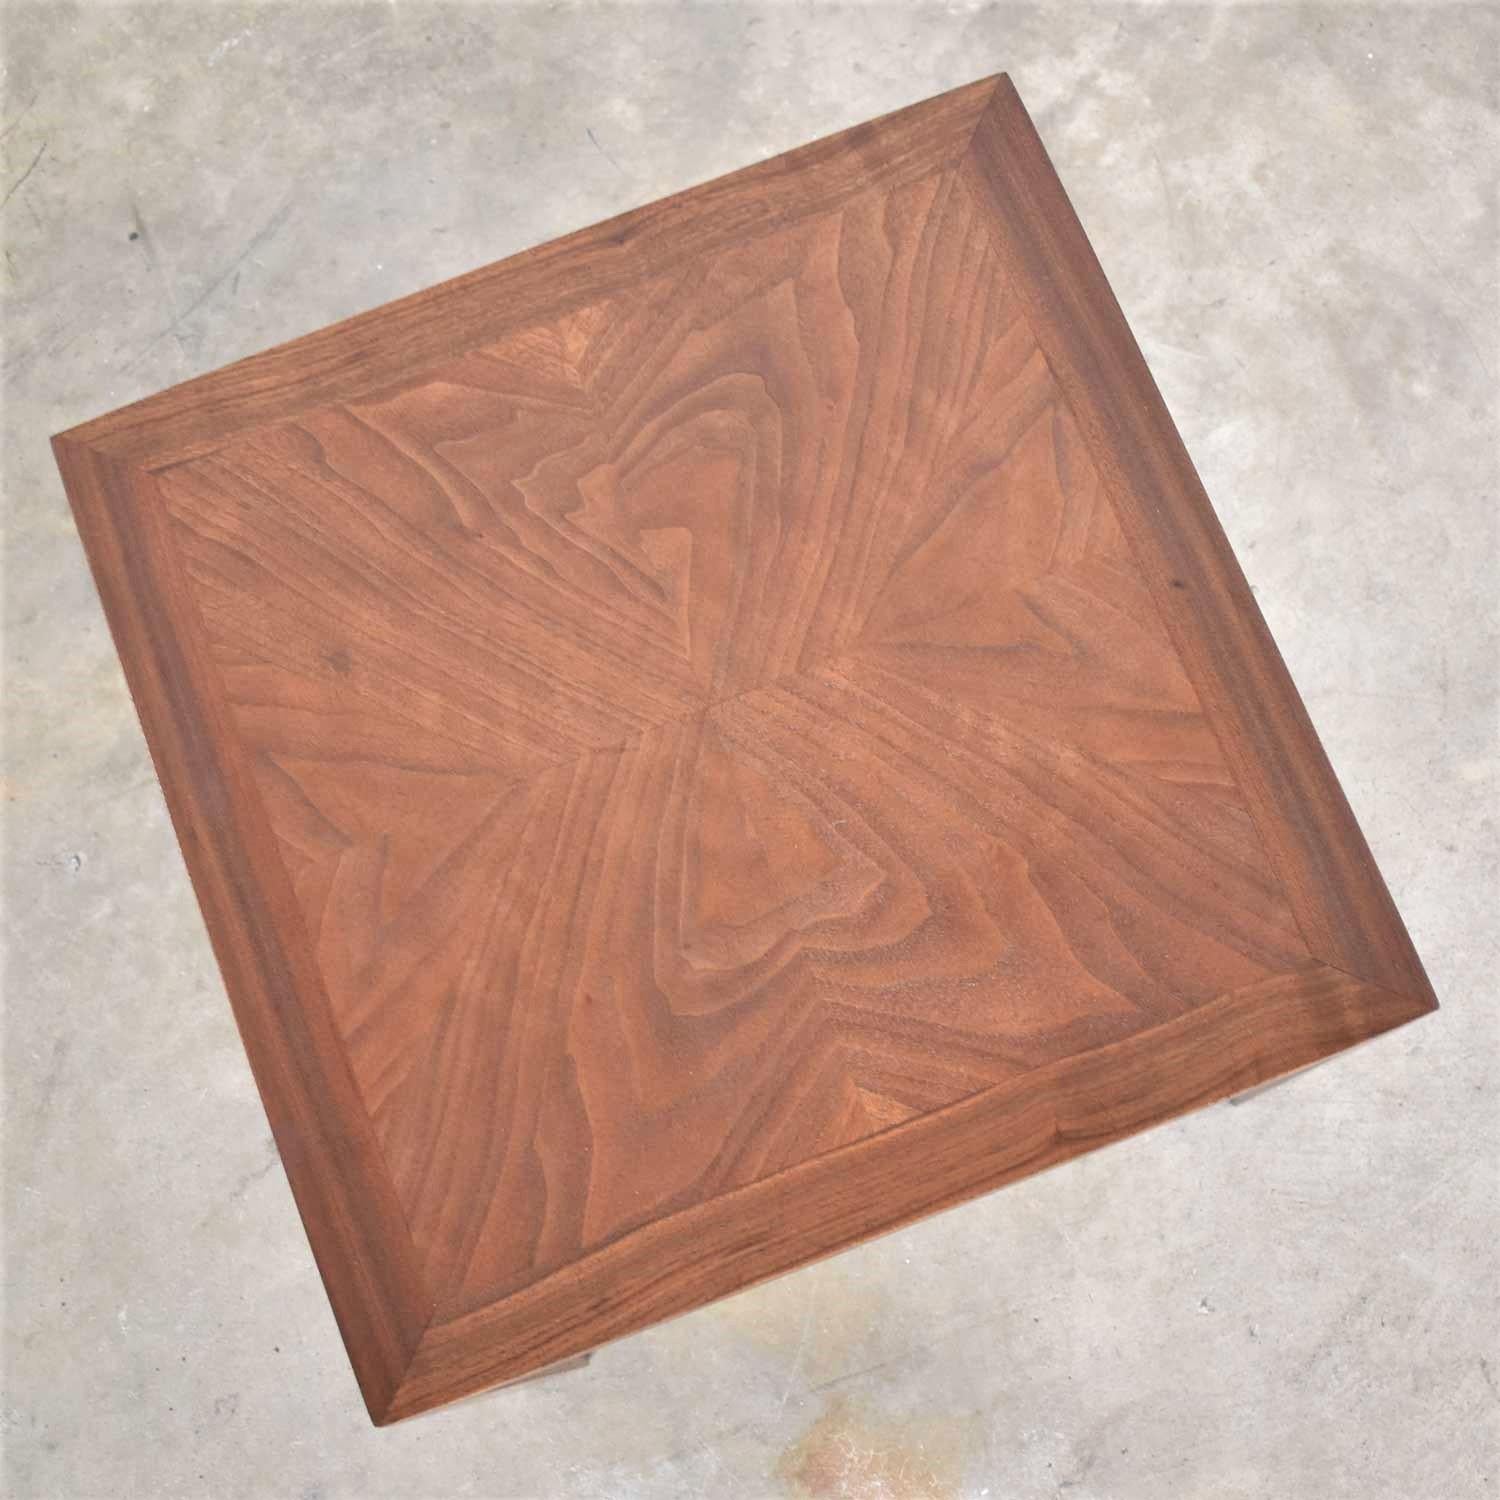 20th Century Vintage Modern Lane Solid Walnut Square Parsons Side Table Style #1124-18, 1970 For Sale